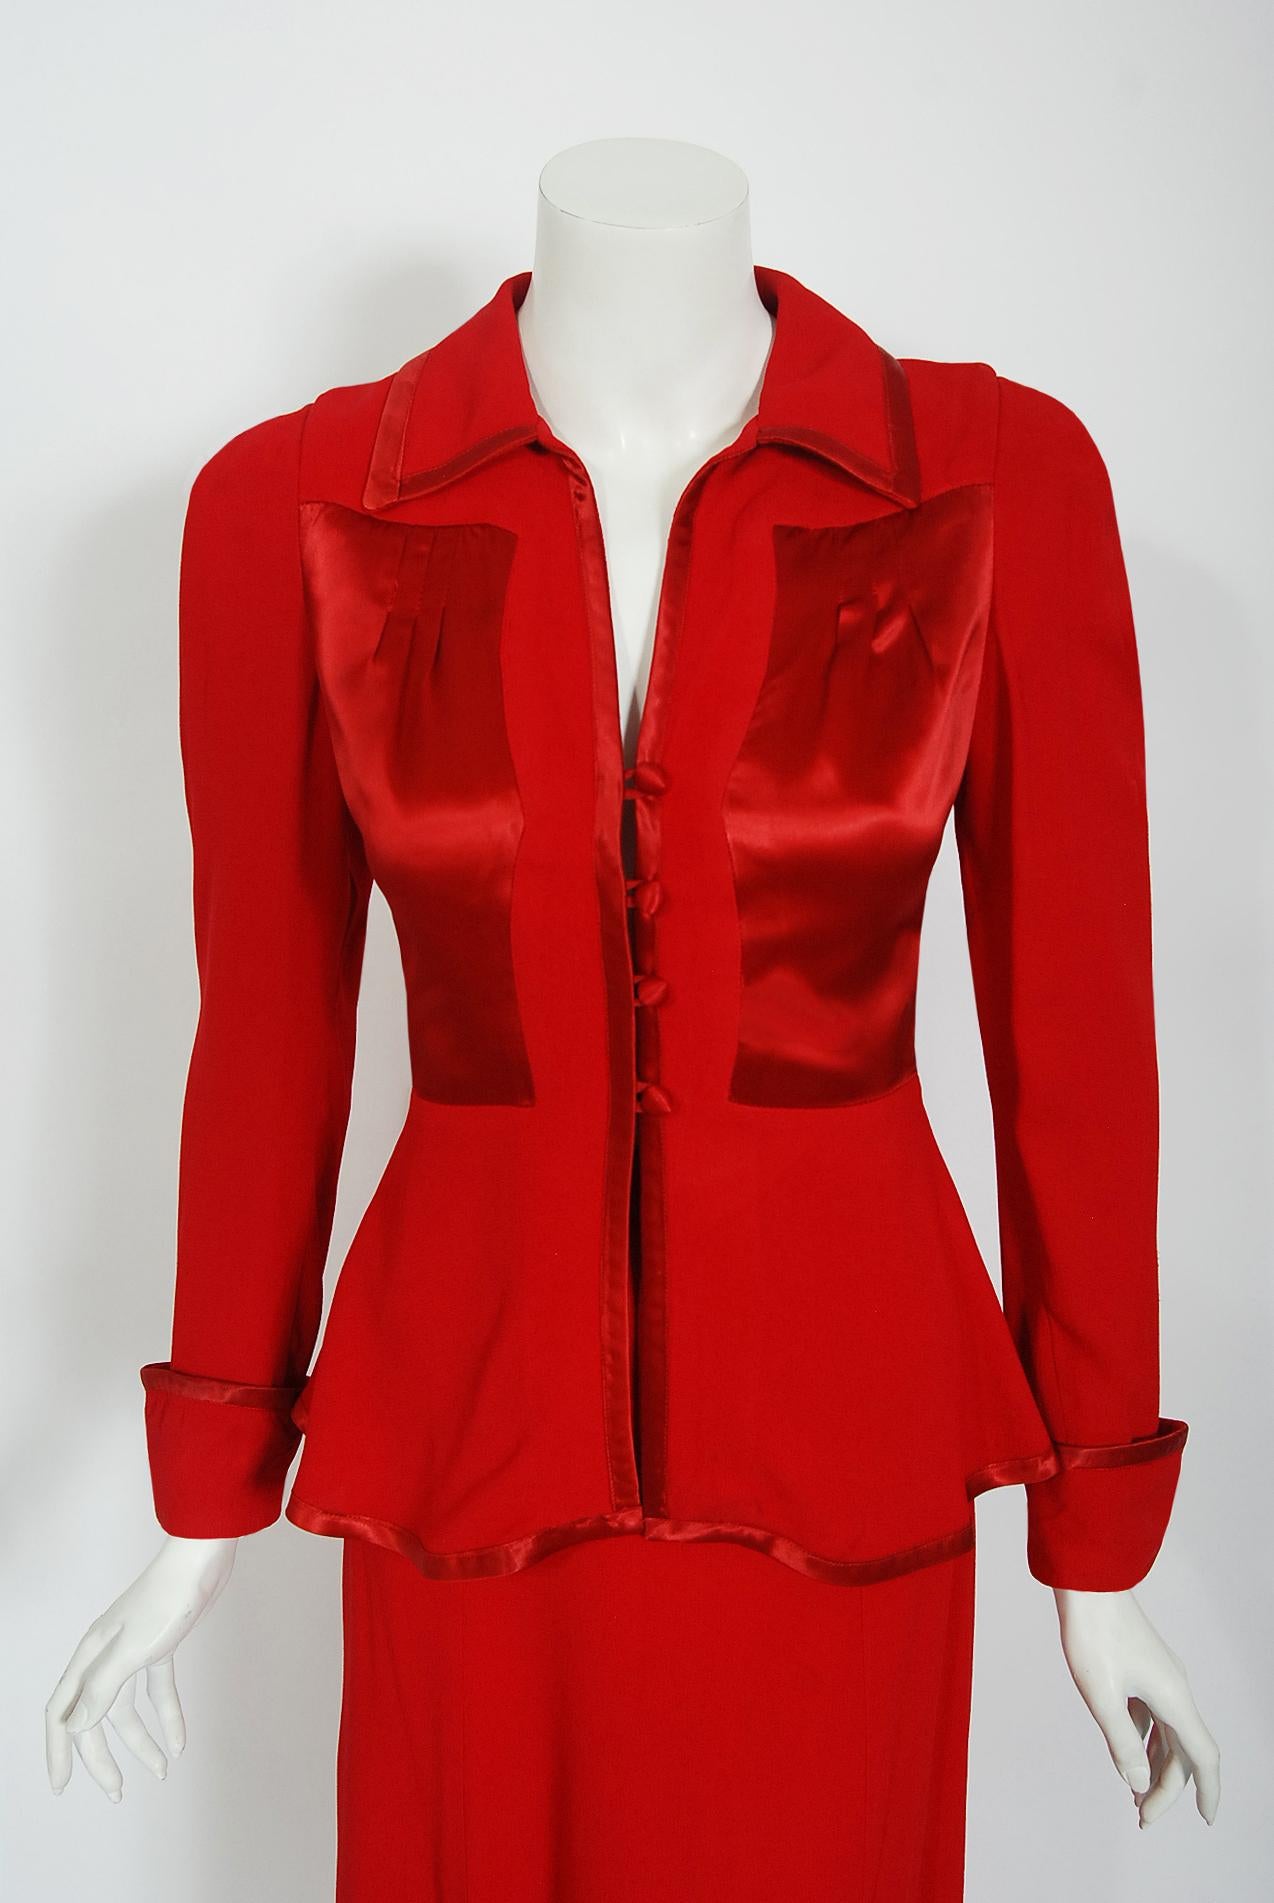 Gorgeous Ossie Clark for Radley ruby red ensemble dating back to the mid 1970's. English fashion designer, Raymond 